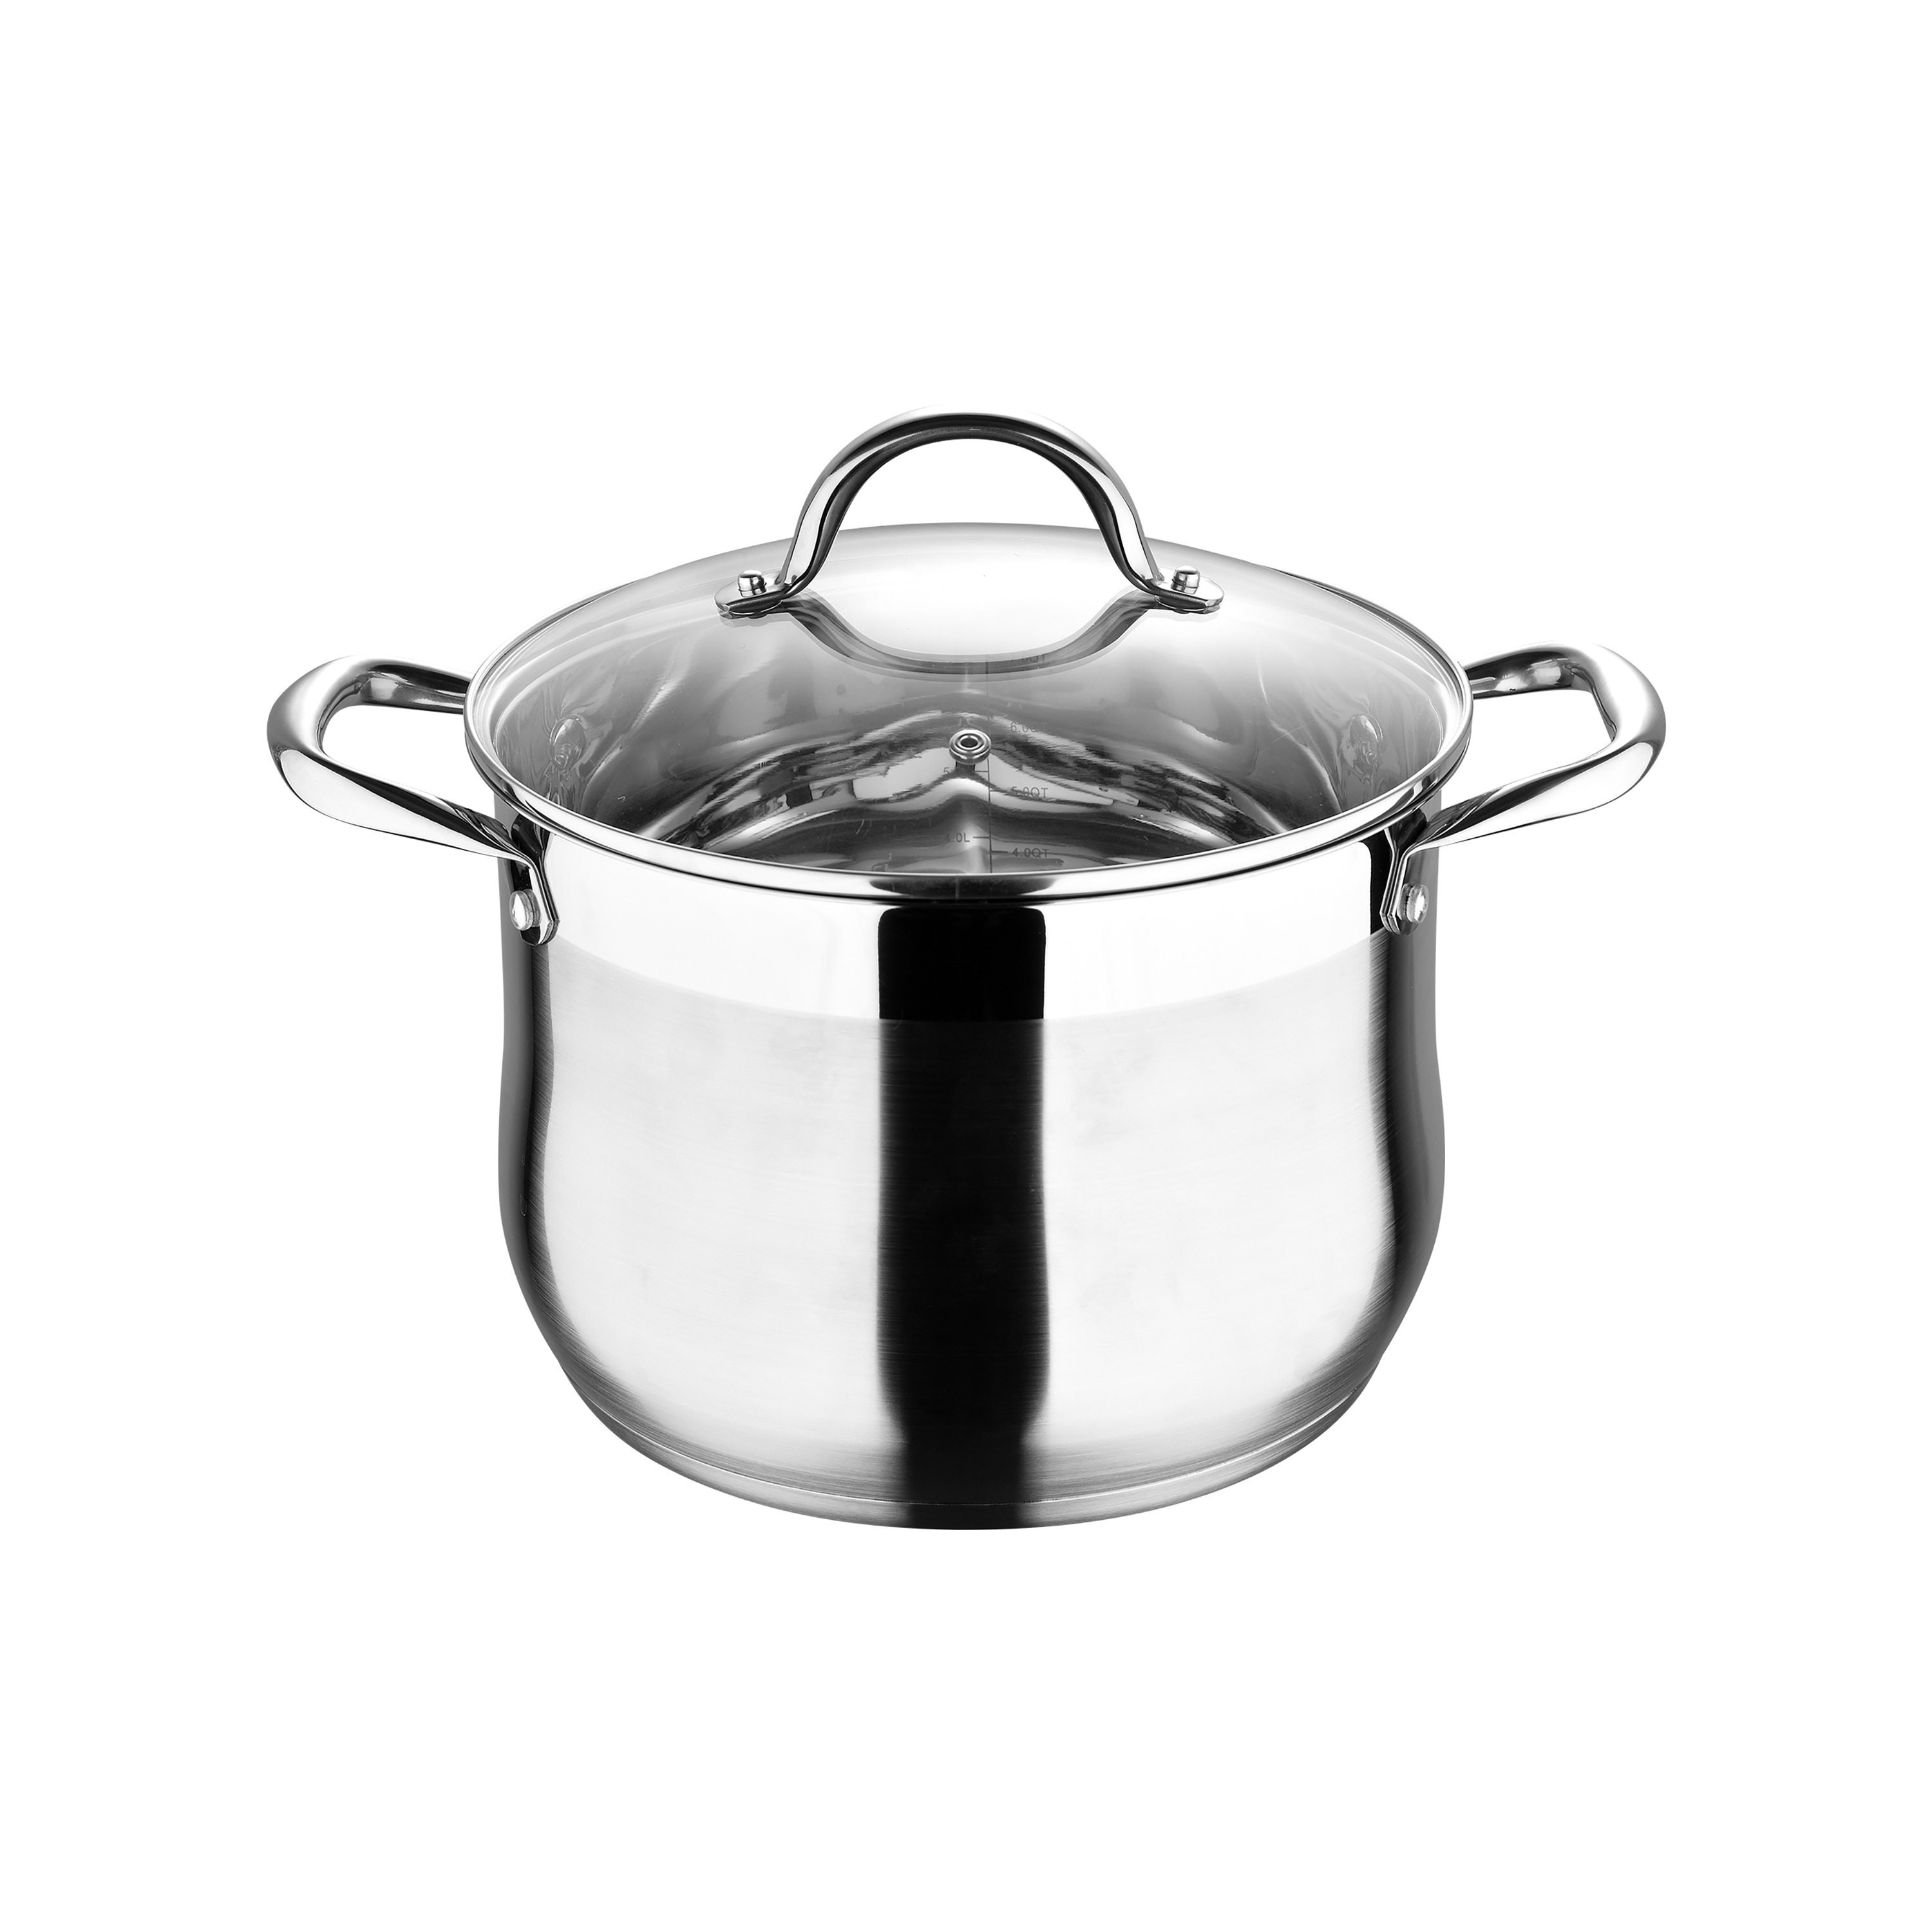 Bergner - Retro Cookware - Pots and Pans Set Nonstick - Induction Cookware  Suitable for all Stove Types - Dishwasher Safe - 4.5 Quart Covered Dutch